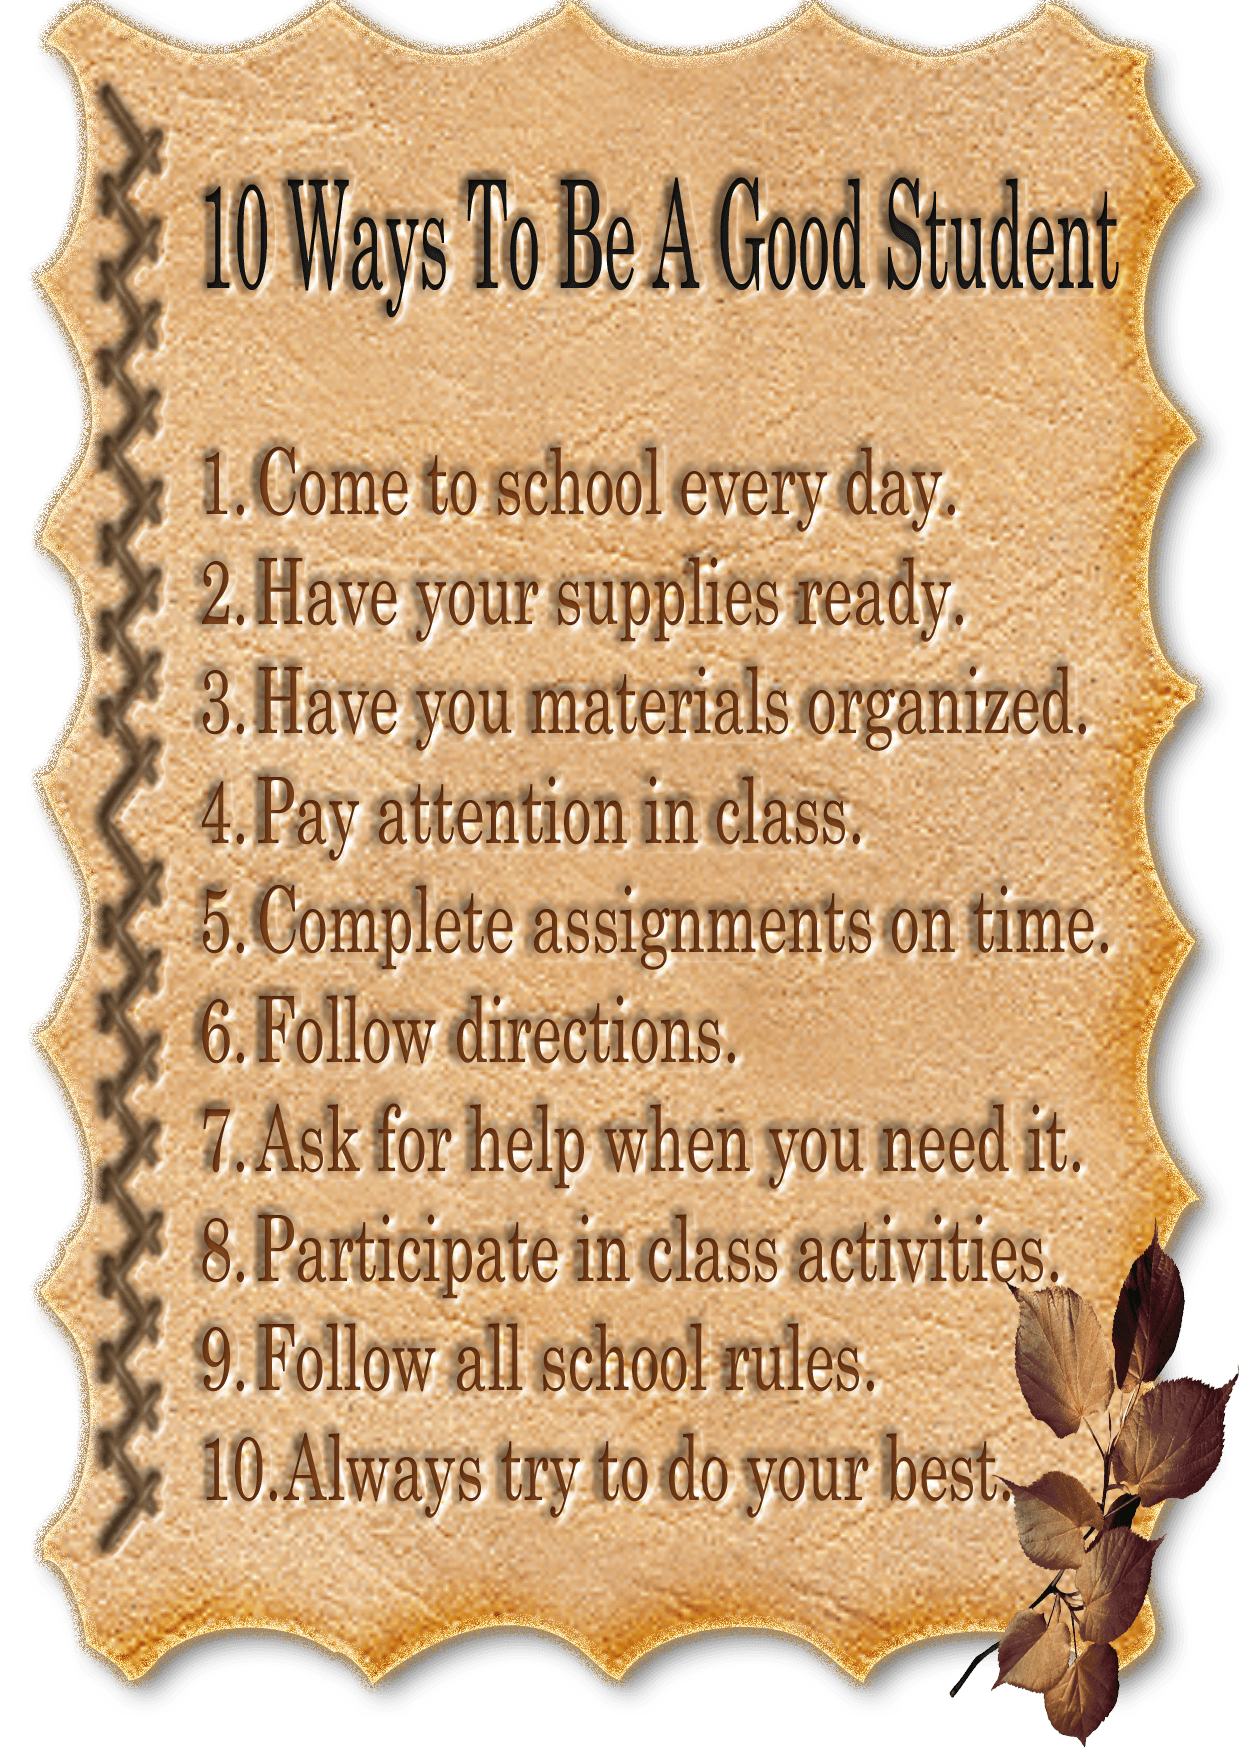 10 Ways To Be a Good Student Classroom Poster